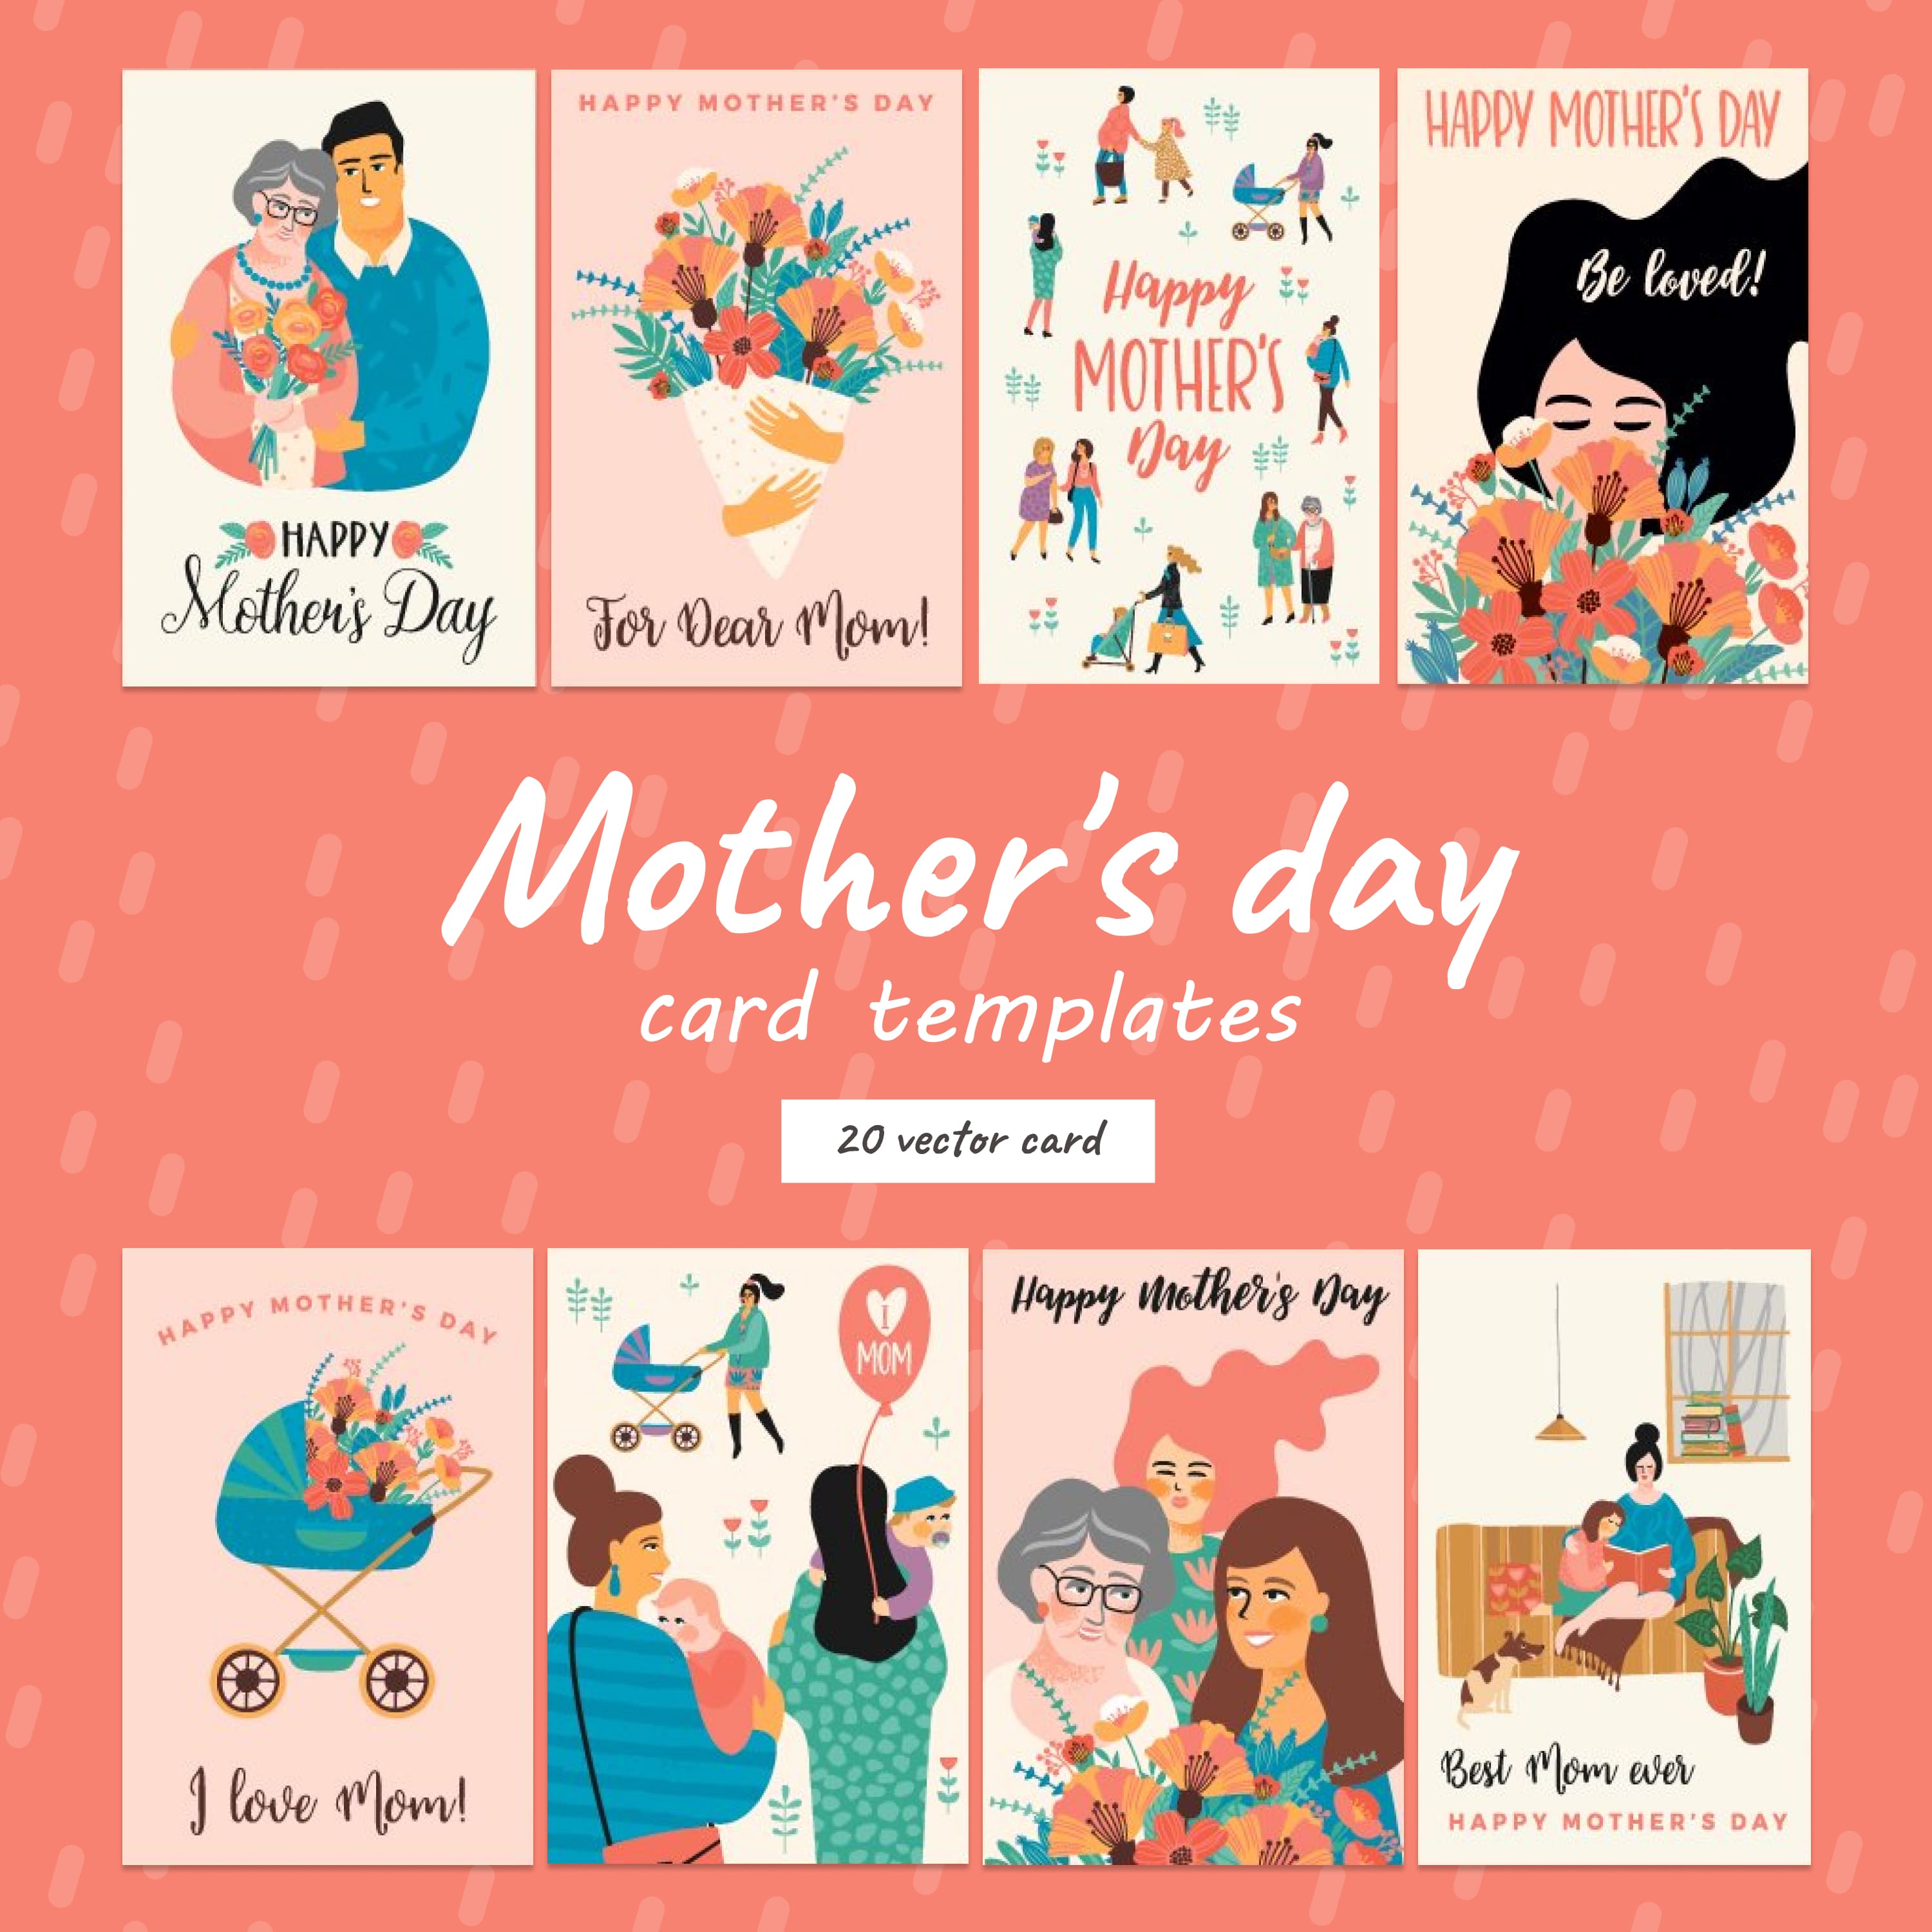 Mother's day card templates cover.